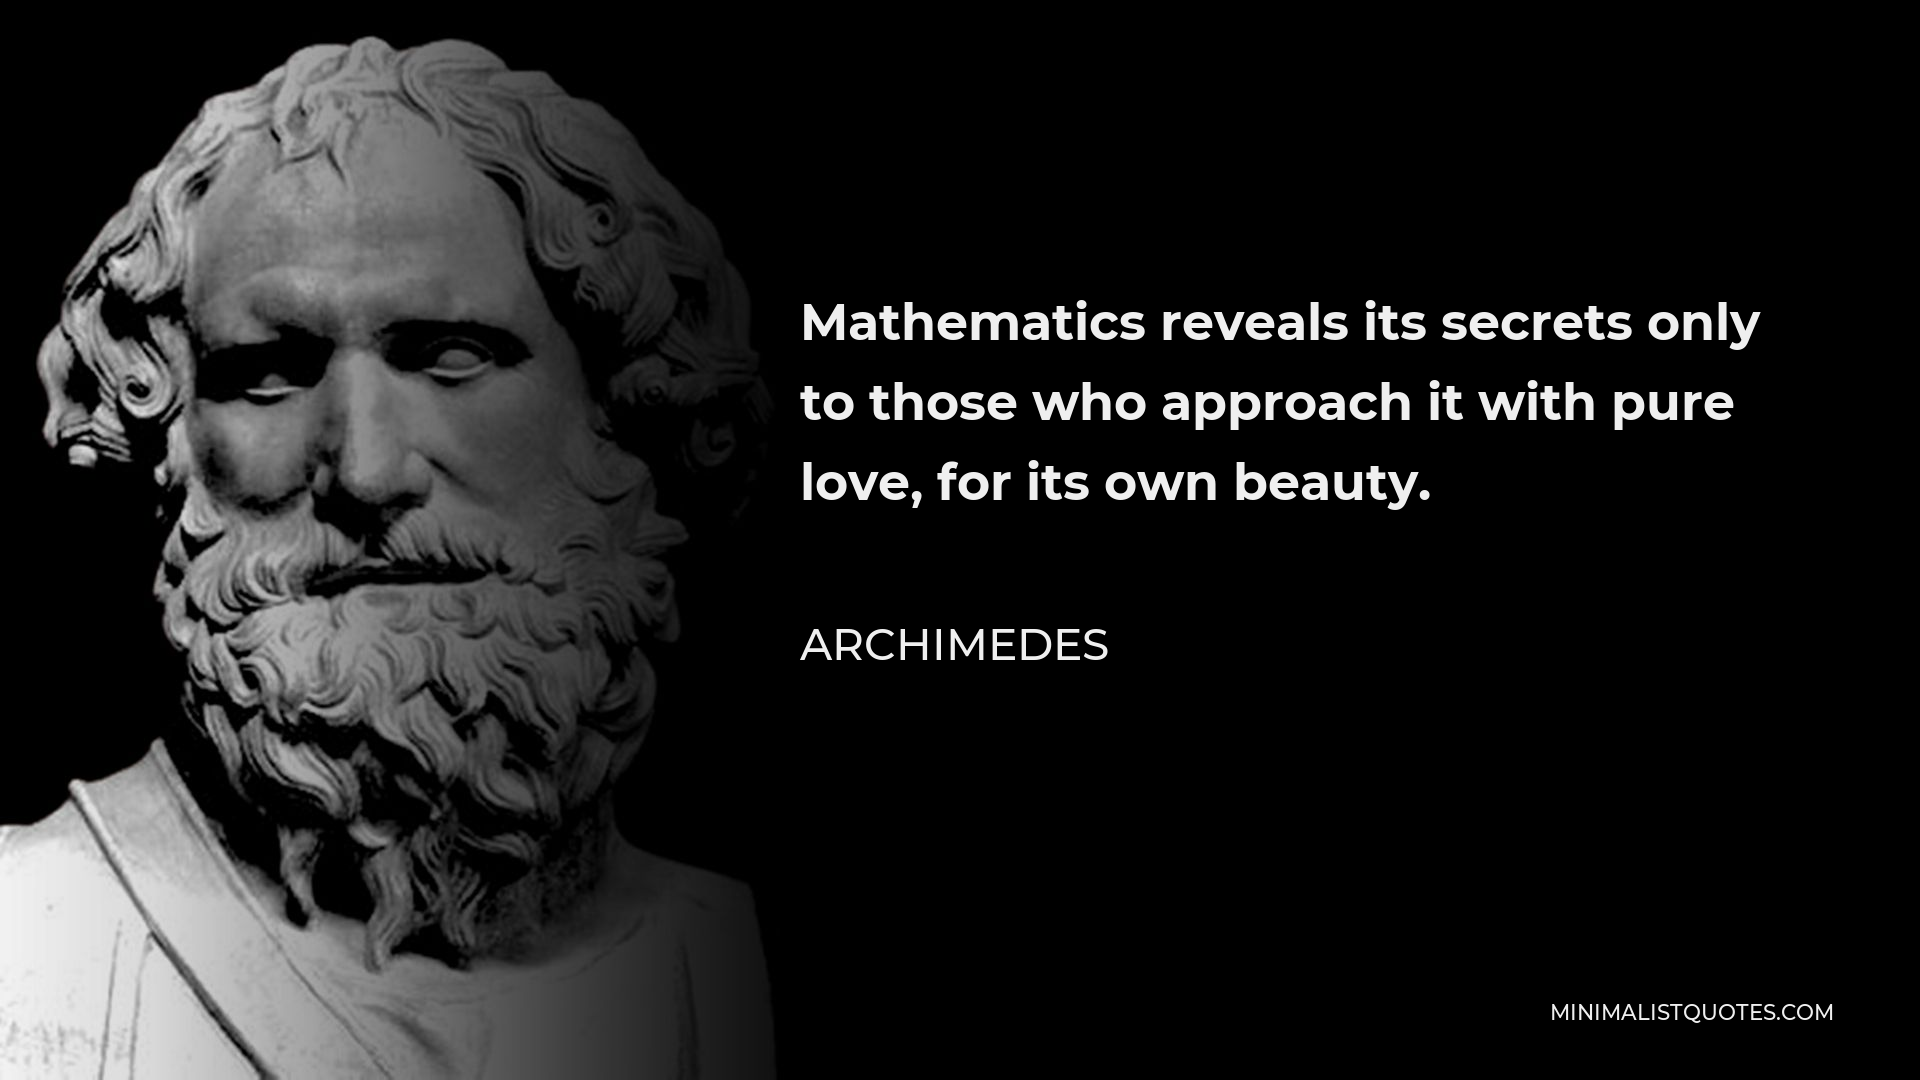 Archimedes Quote - Mathematics reveals its secrets only to those who approach it with pure love, for its own beauty.